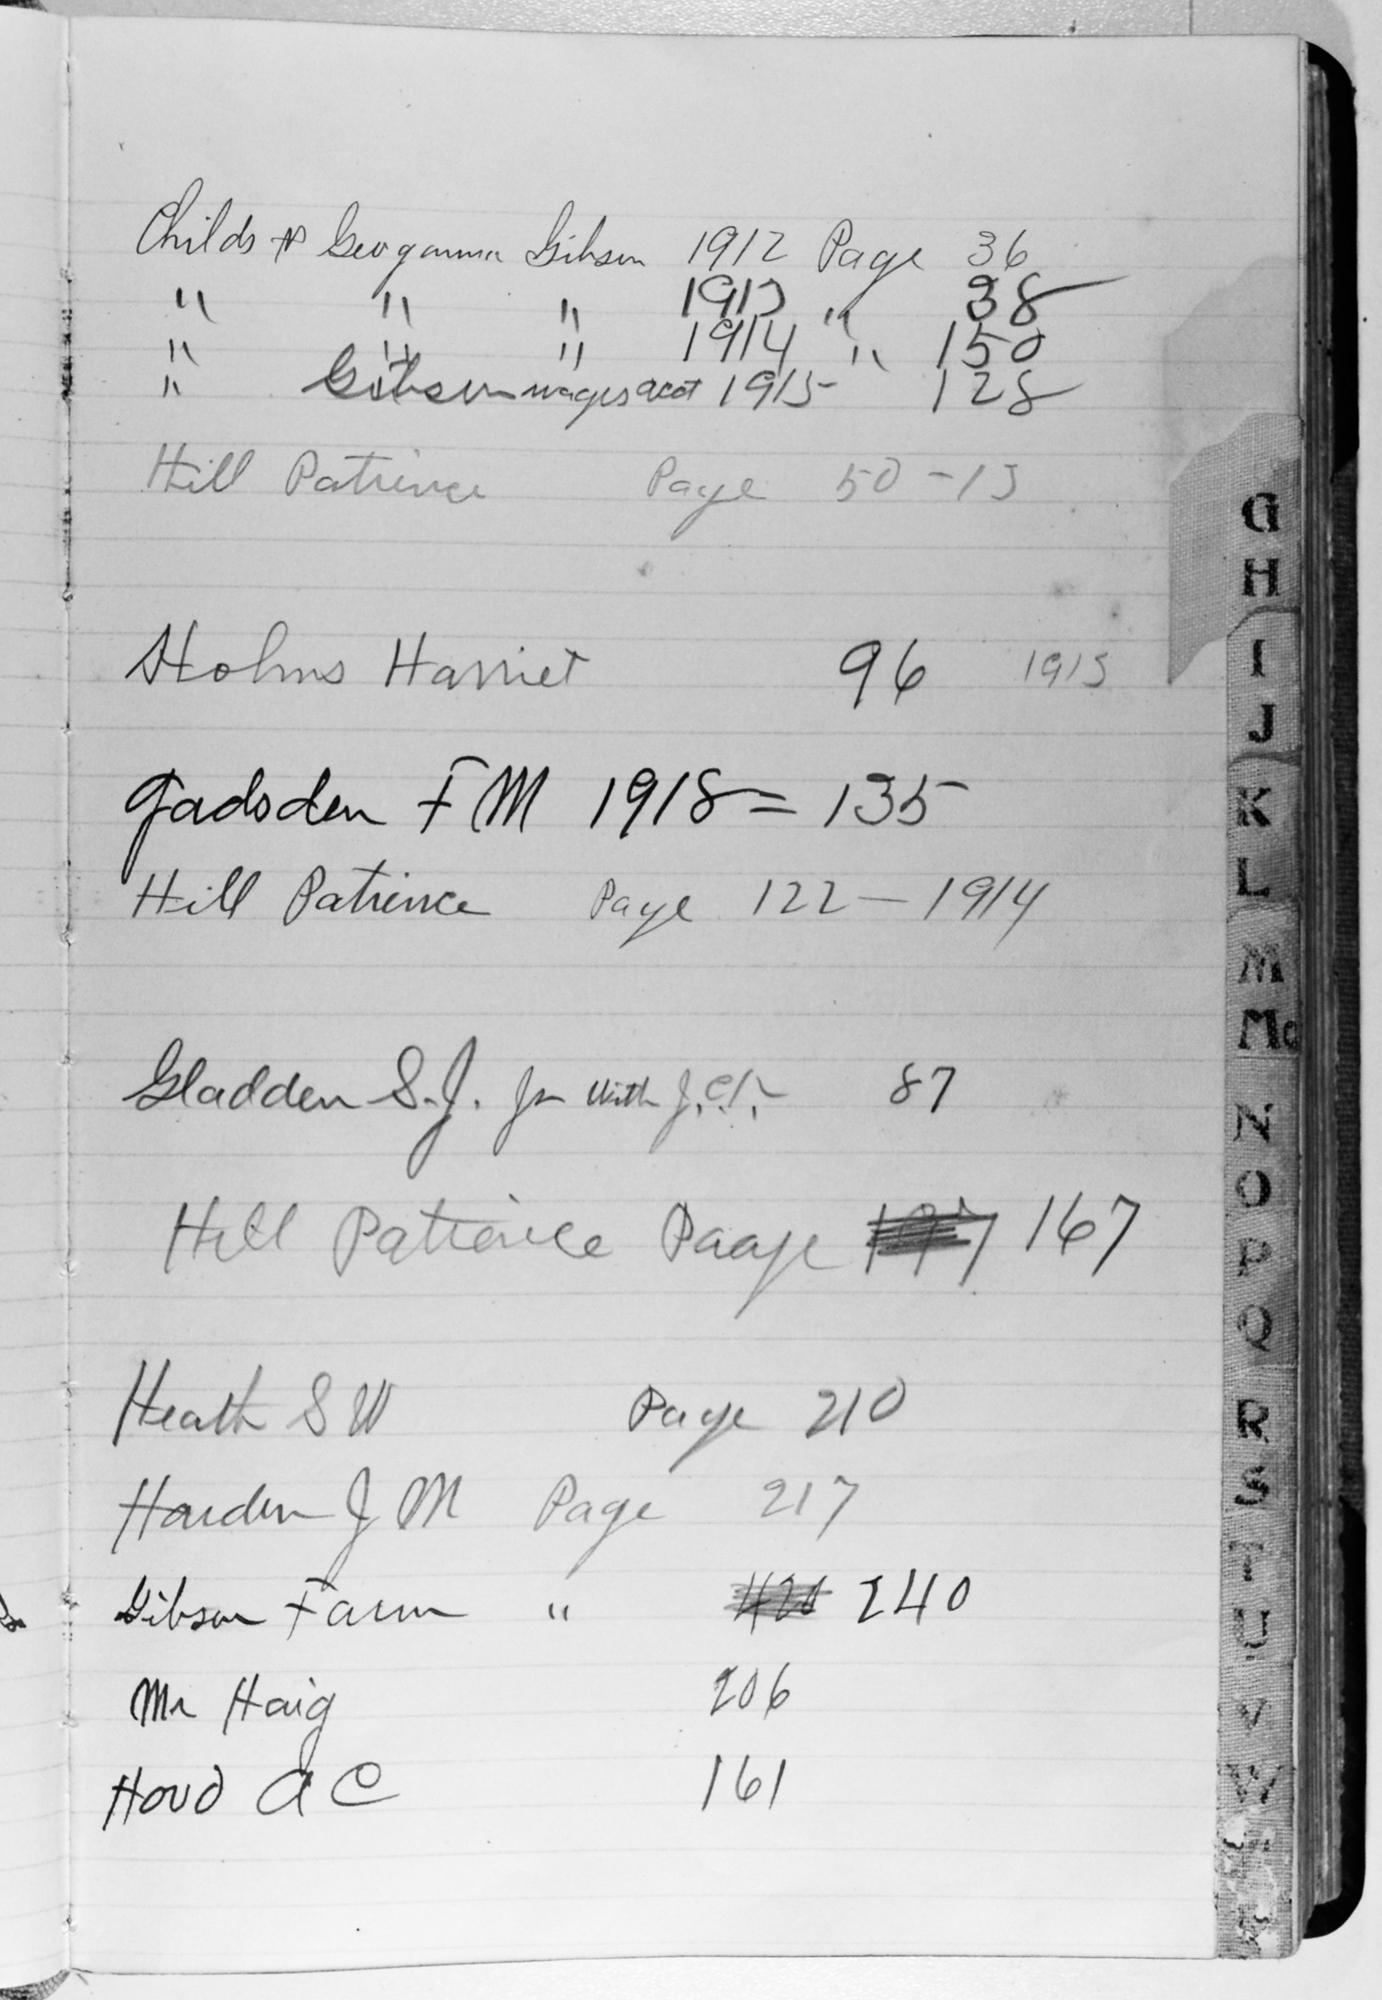 LEDGER PAGES FROM THE STORE 1912 - Alphabetical 